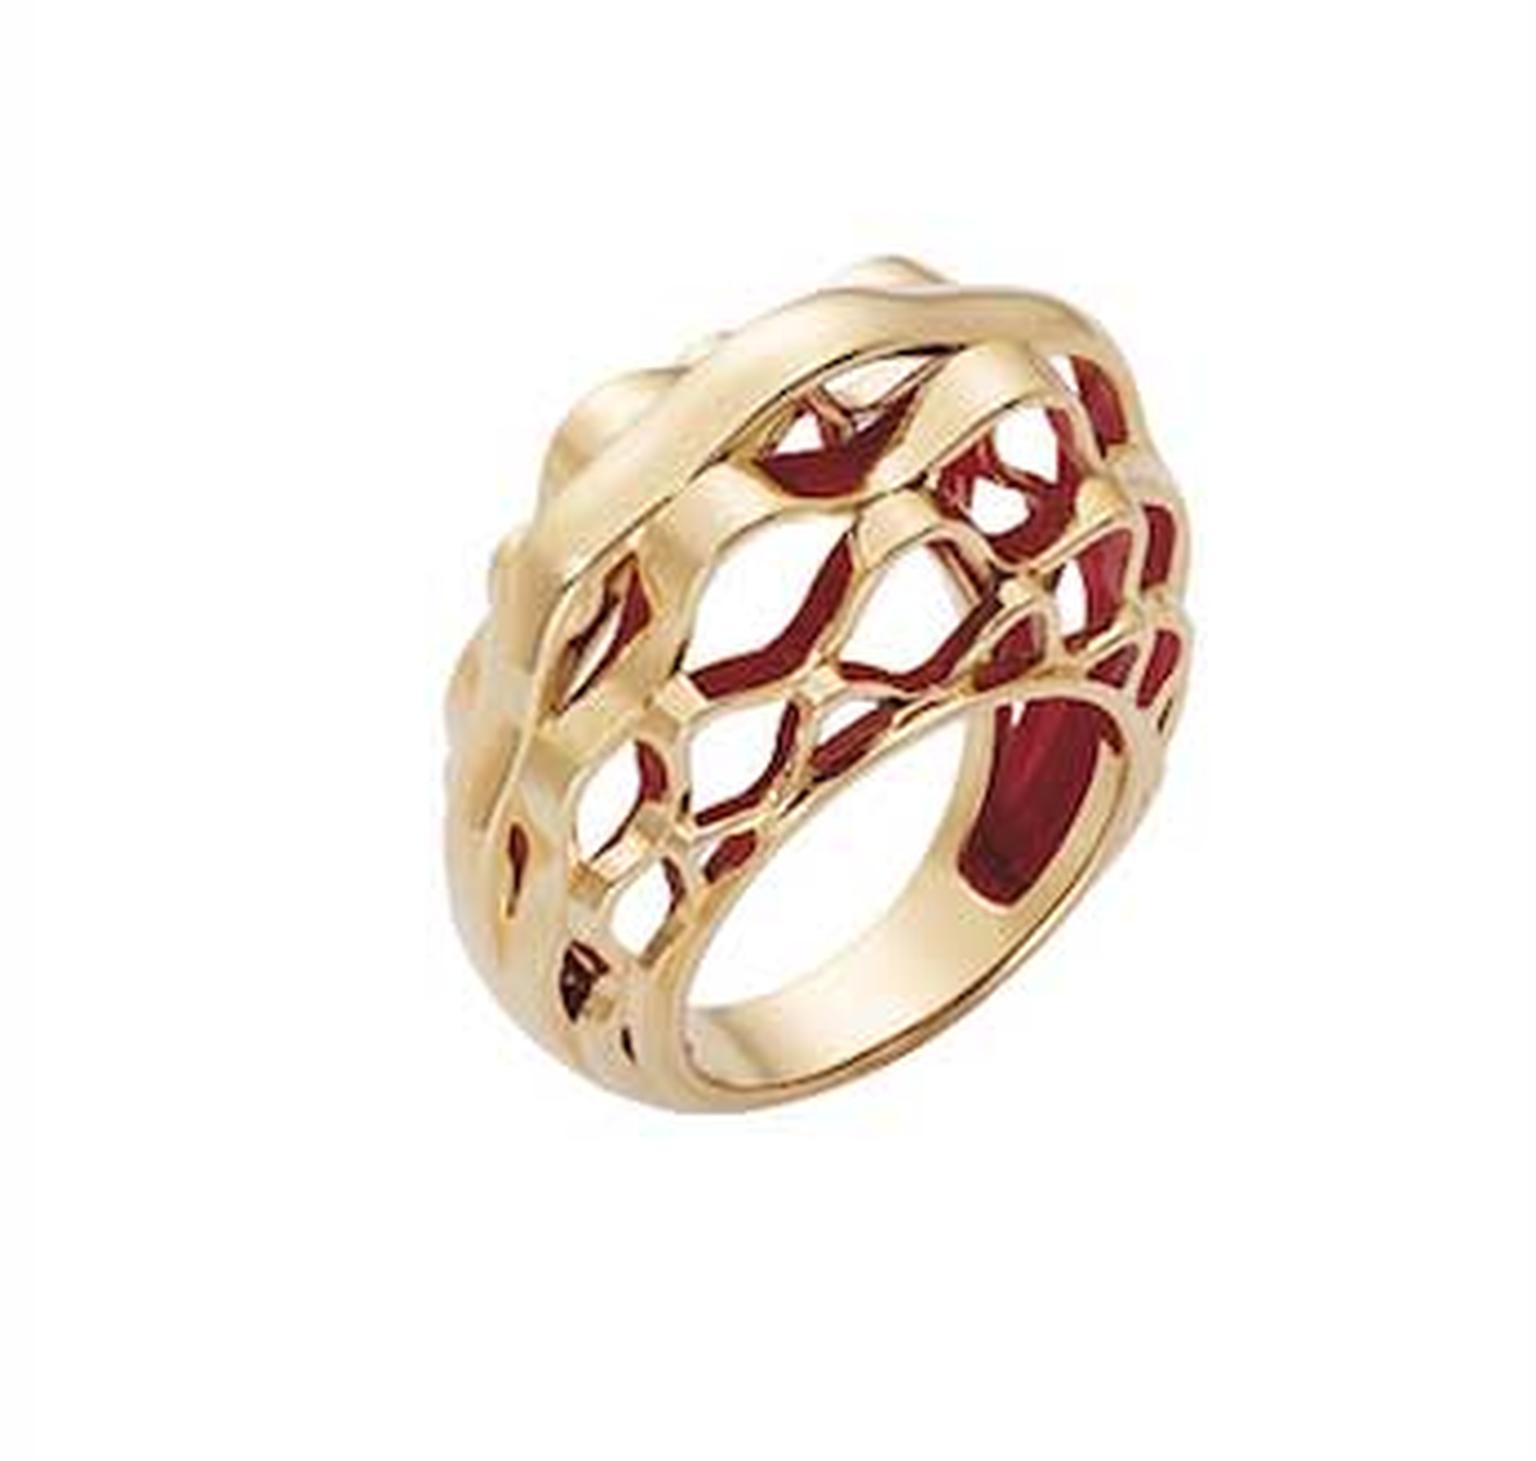 The glass dome of the Grand Palais is reflected in this dramatic new Cartier Paris Nouvelle Vague ring in yellow gold.